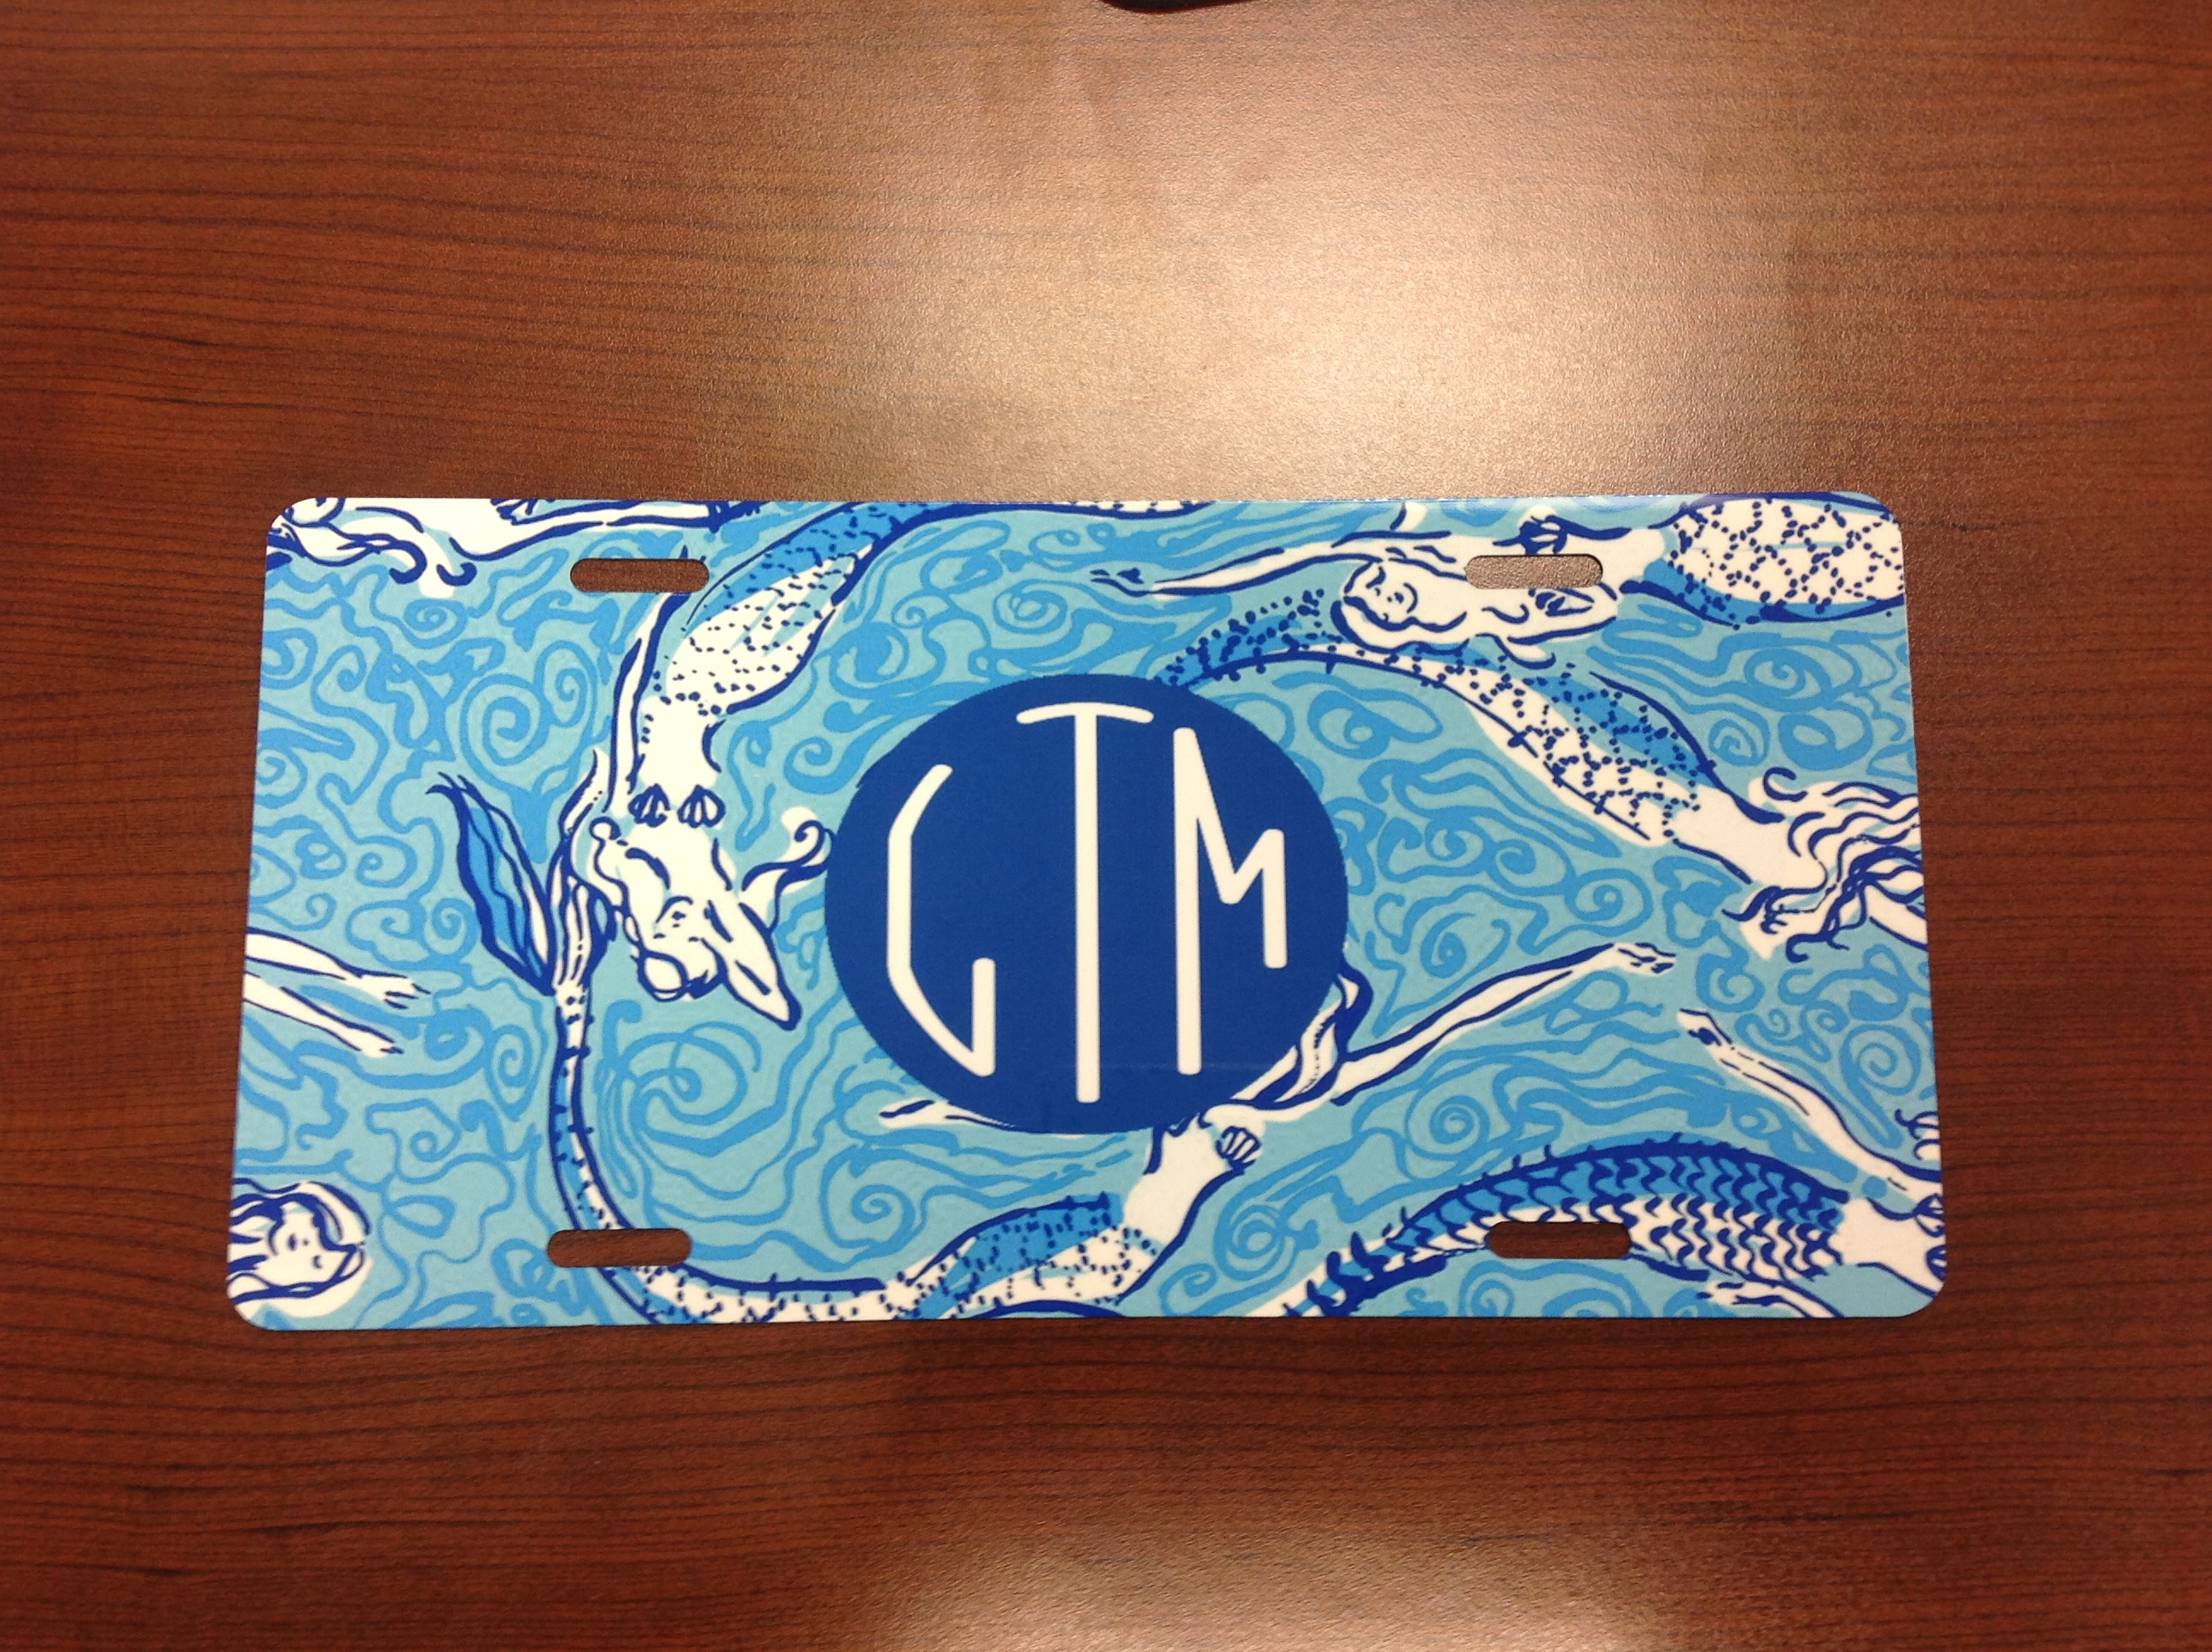 Mermaid License Plate made with sublimation printing